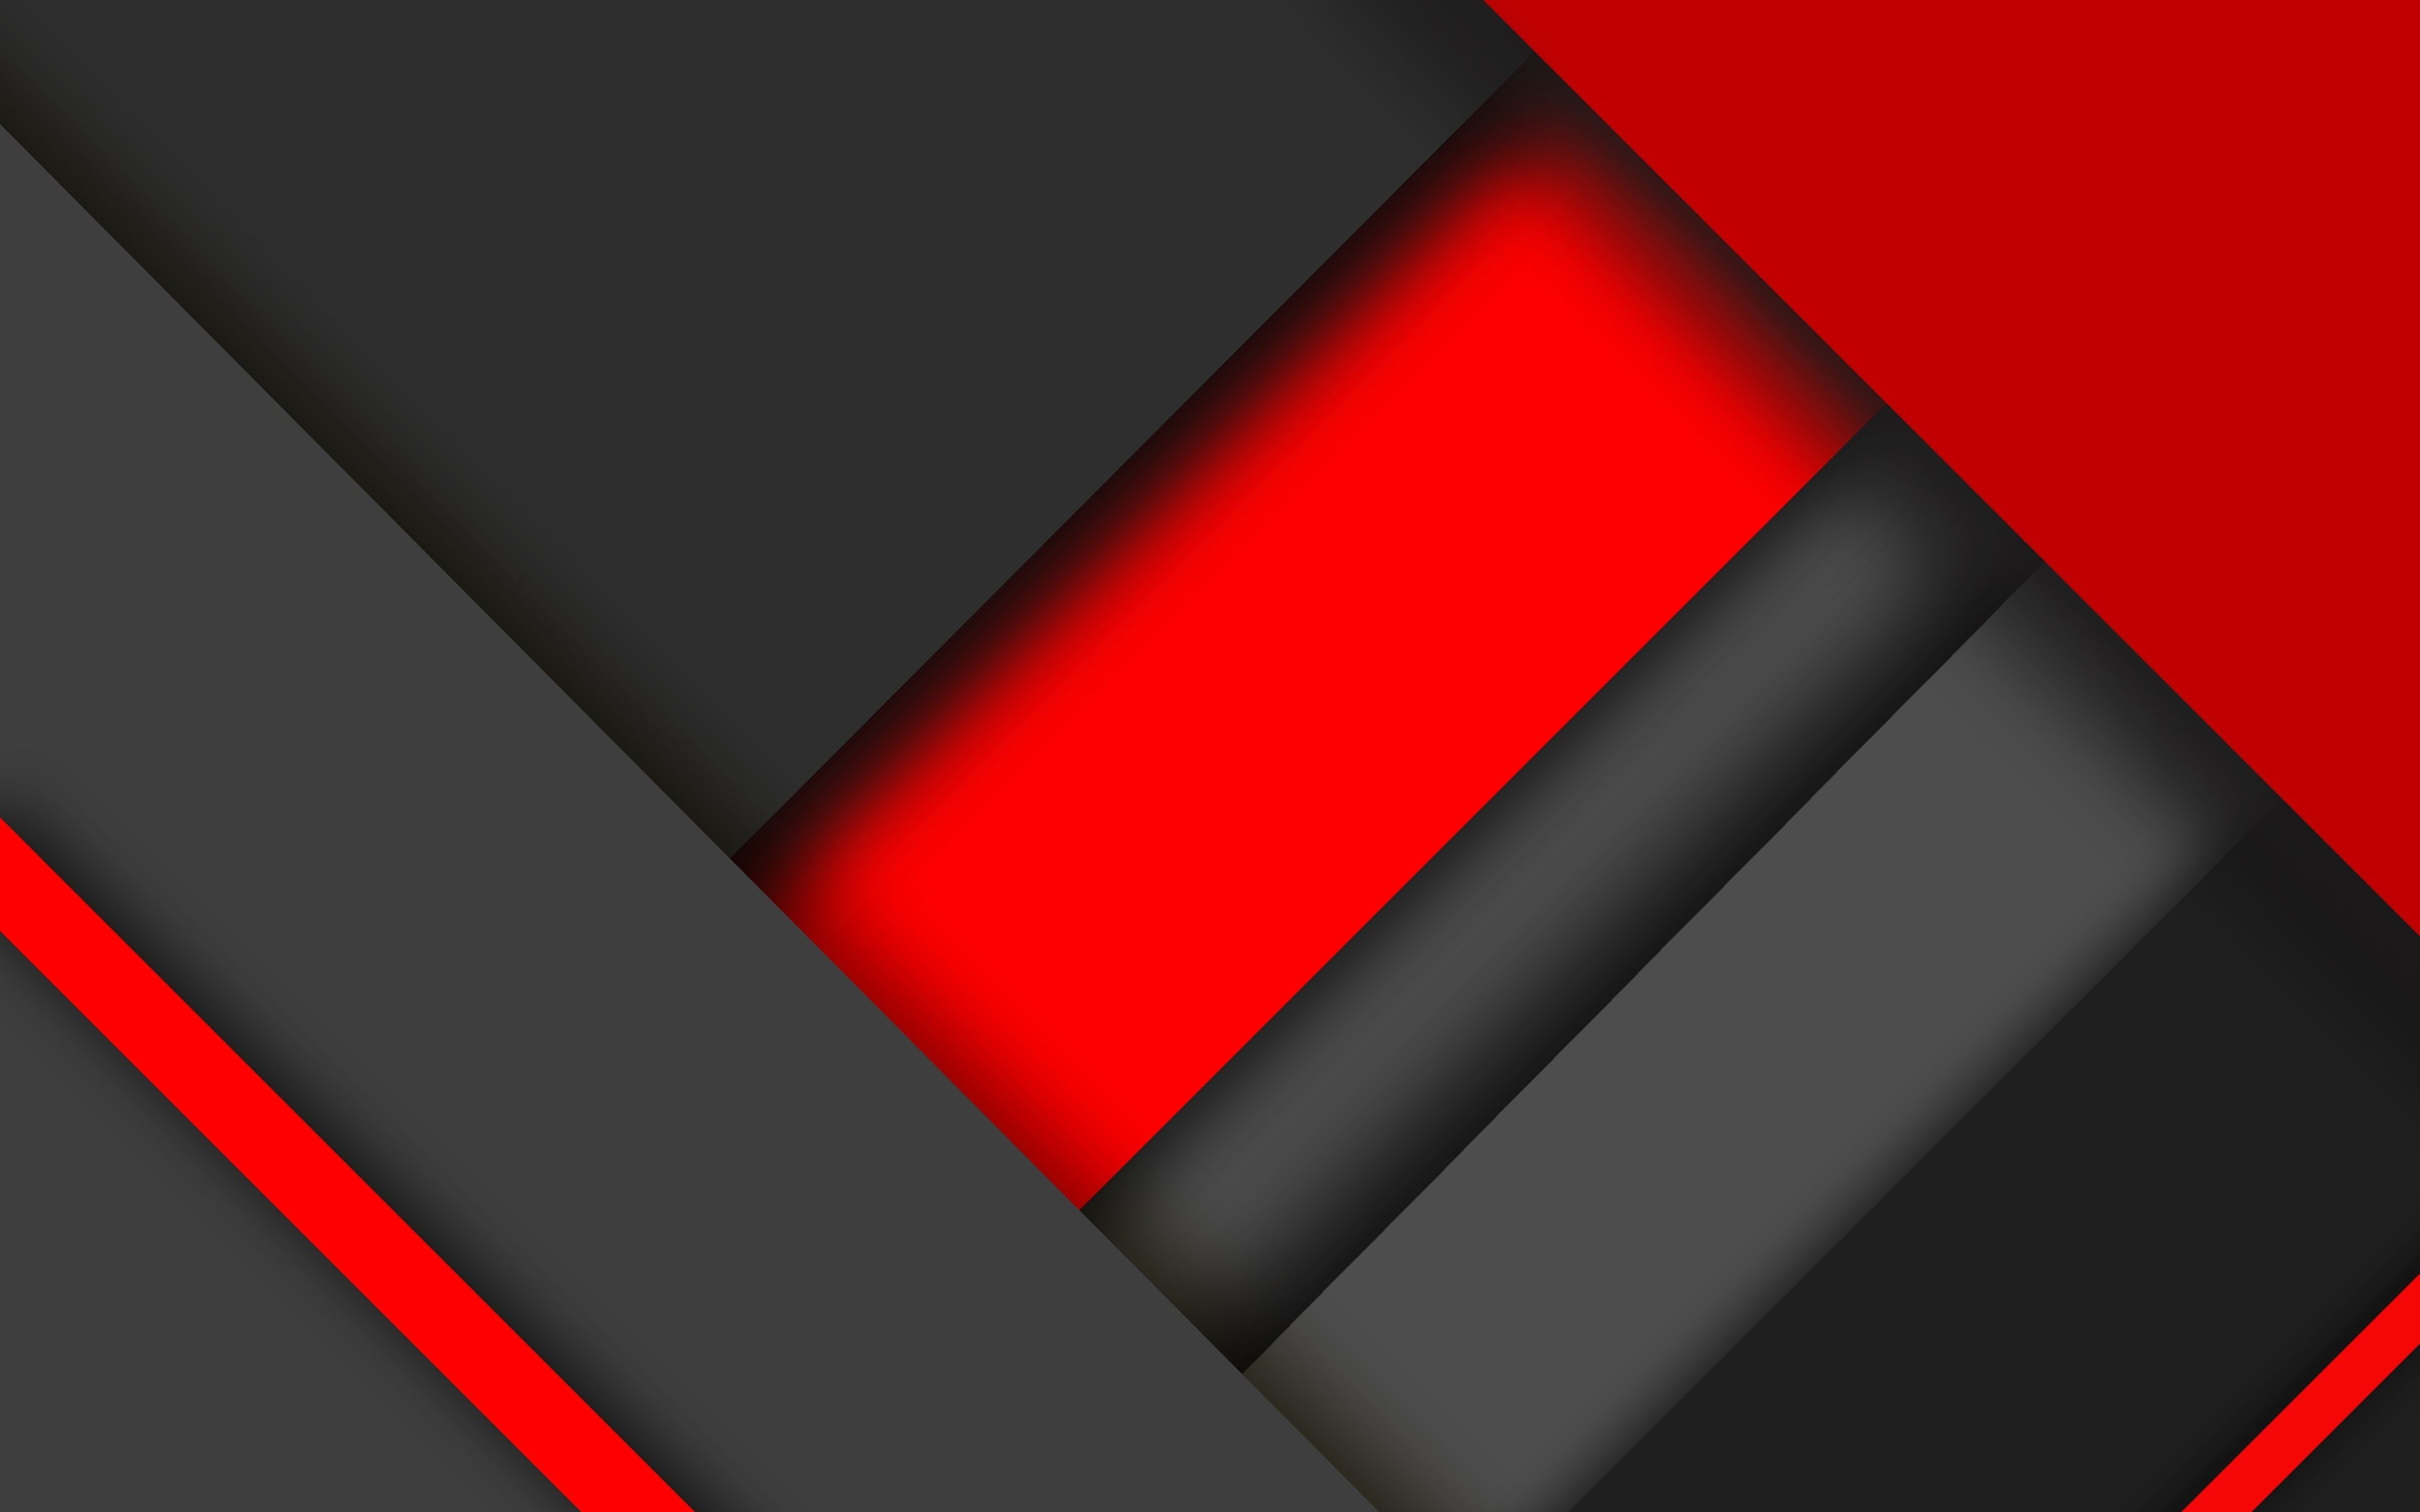 4k, material design, red and black, colorful lines, geometric shapes, lollipop, triangles, creative. Dark background, Dark background wallpaper, Geometric shapes